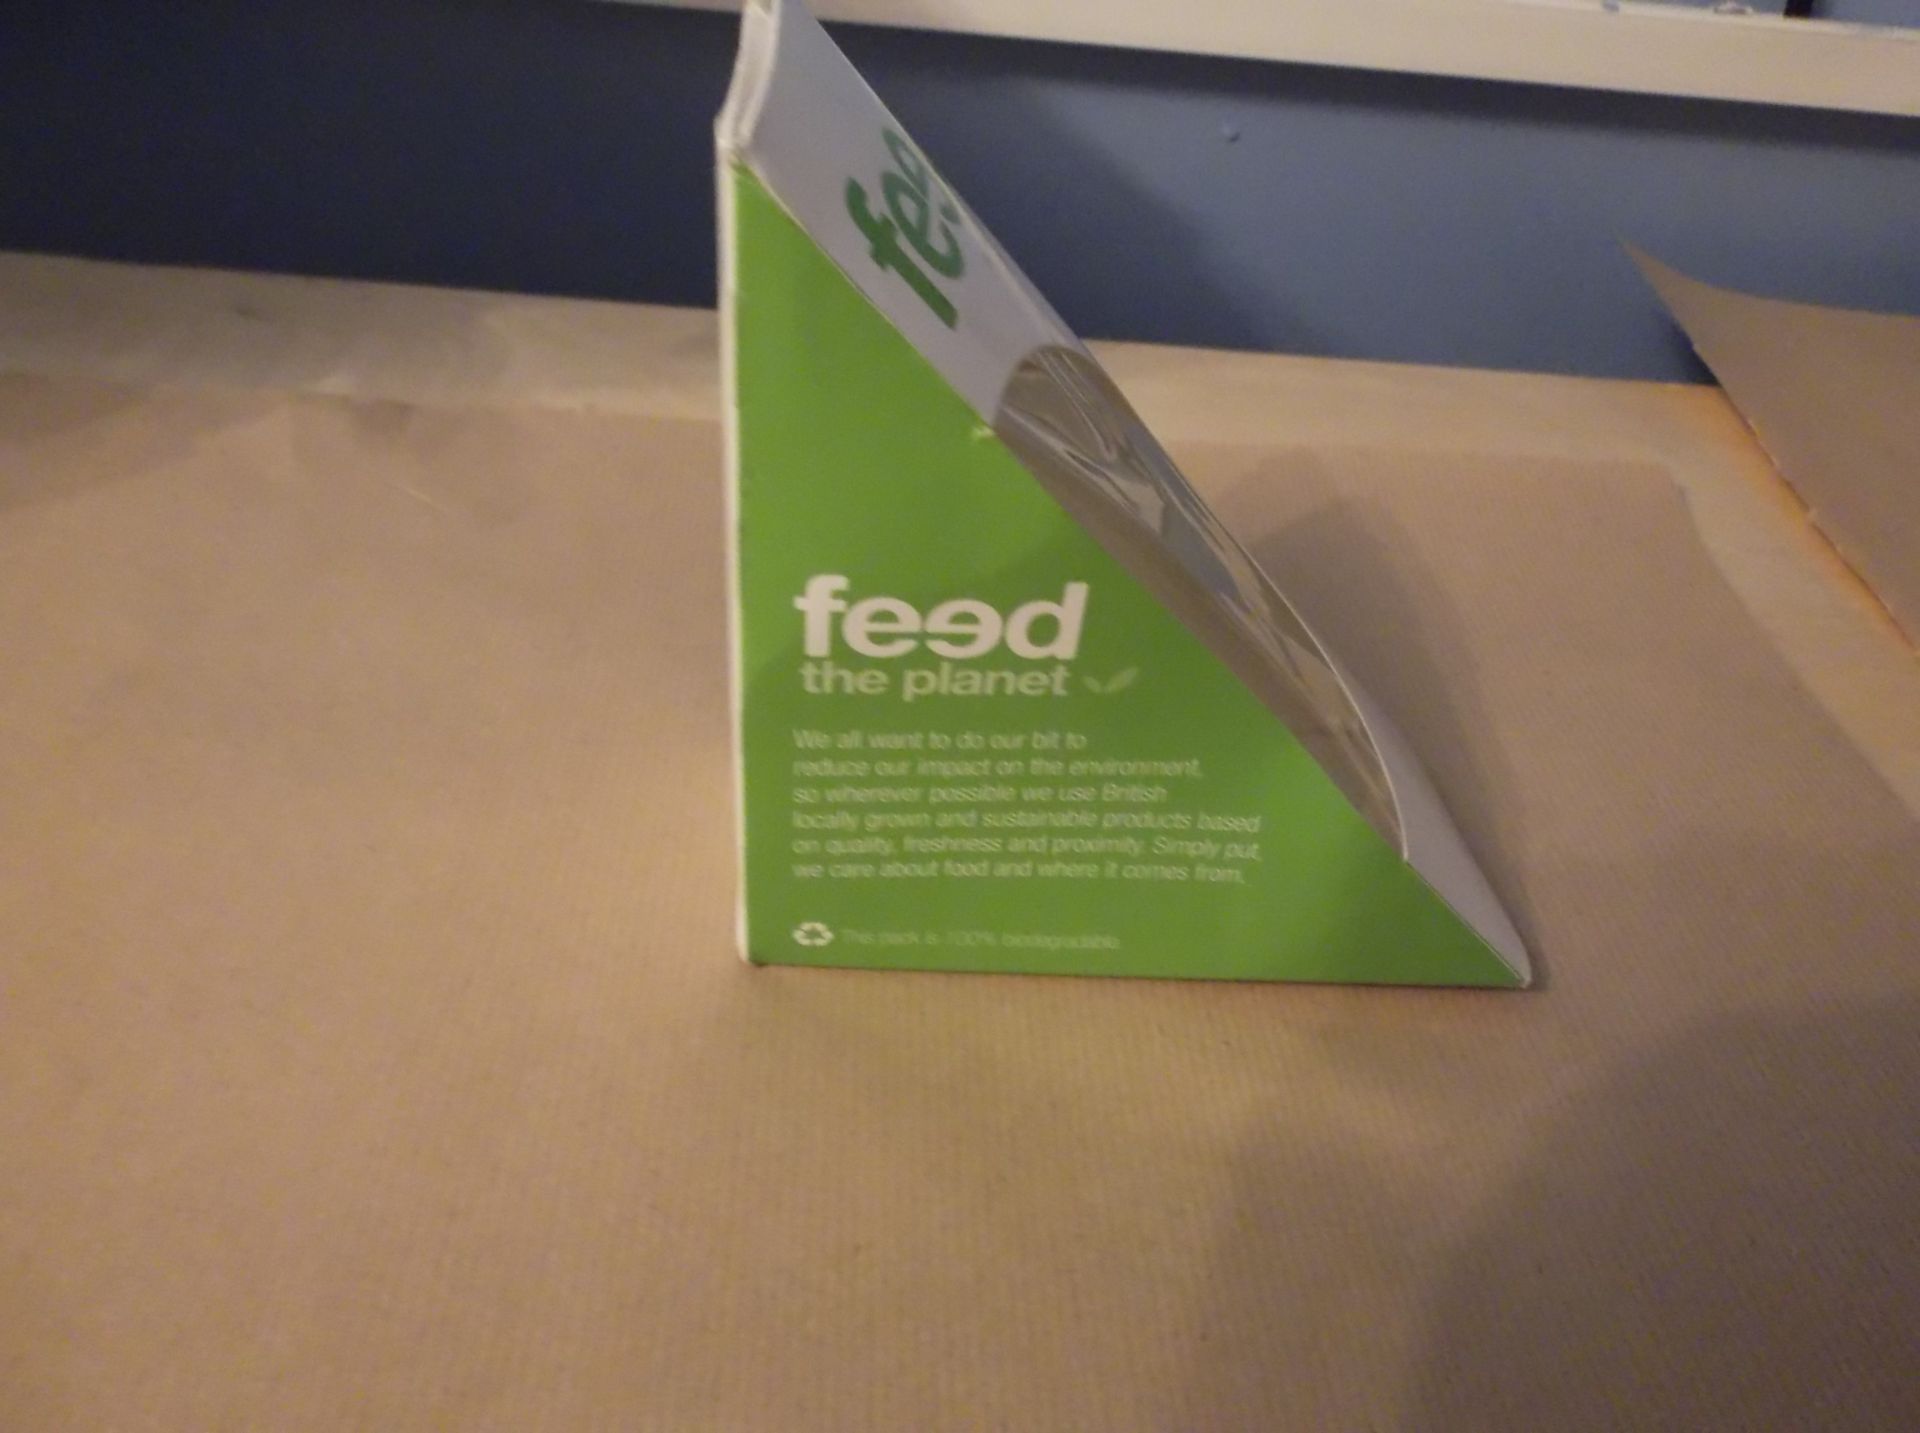 1 Bx Of 500 Eco Frendly Cardboard Sandwich Wedge - Image 4 of 6